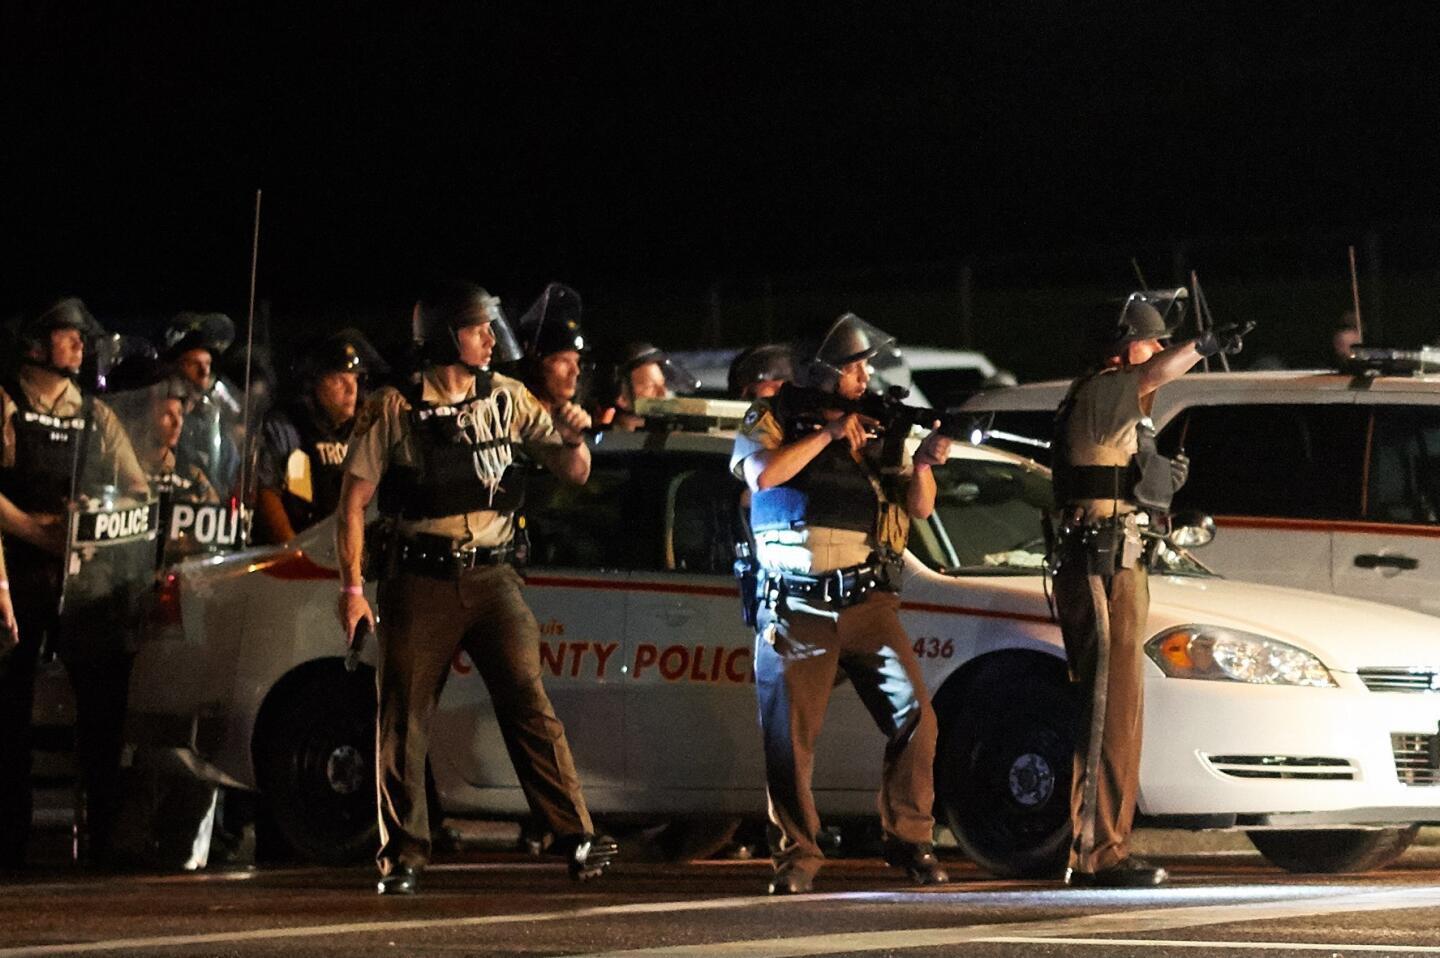 A St. Louis County police officer directs an oncoming car looking to evacuate the area after a police involved shooting during a protest march on August 9, 2015 on West Florissant Avenue in Ferguson, Missouri.